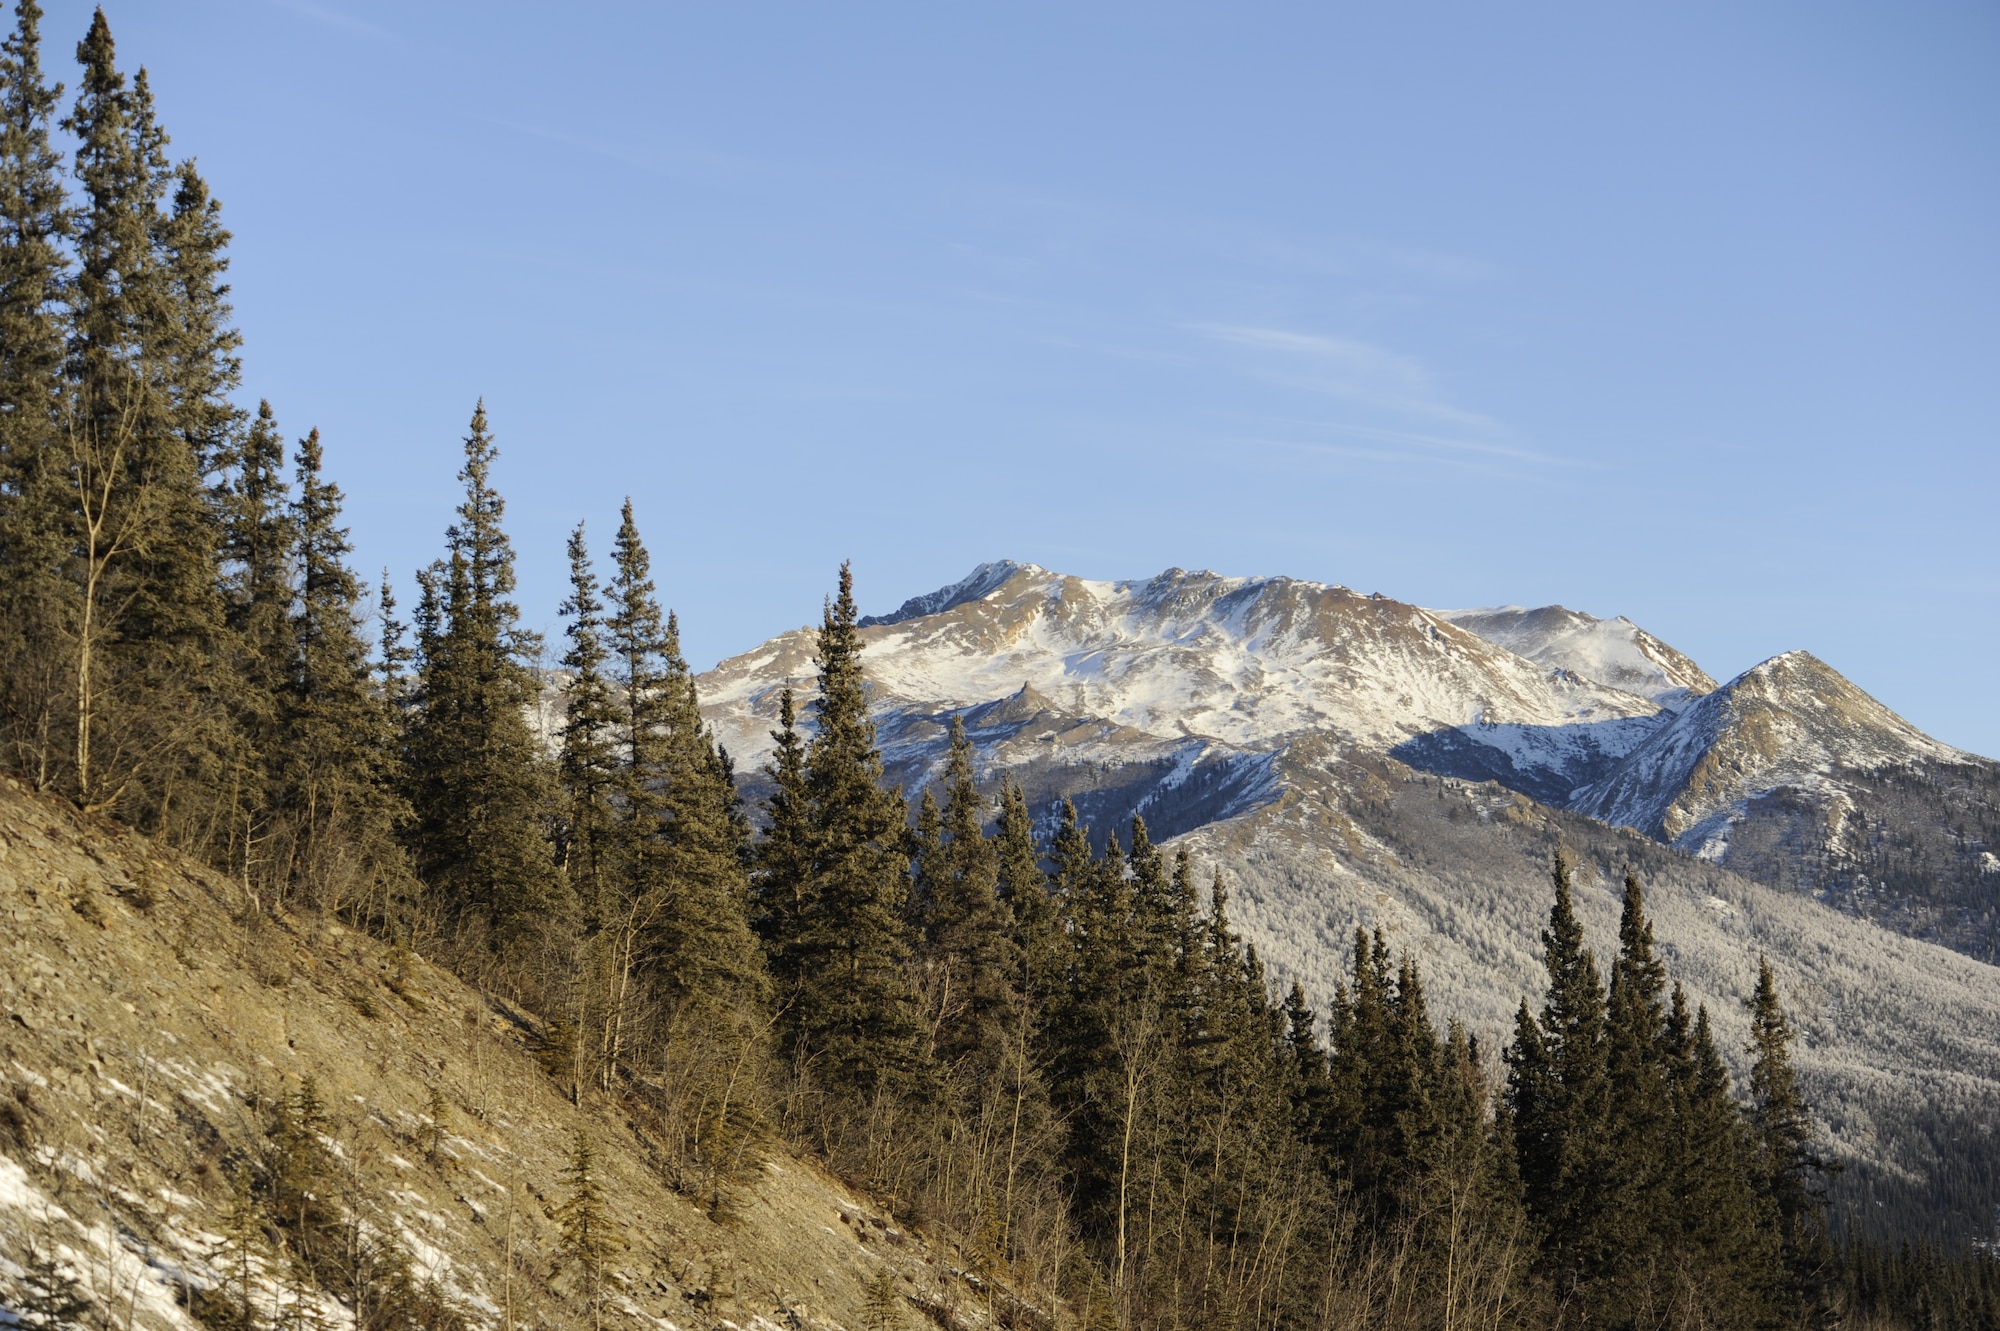 A mountain sits behind a foreground of evergreens in Denali National Park, Alaska, Jan. 19, 2015. Denali National Park is one of 23 national parks in Alaska and is home to Mount McKinley, the highest peak in North America. (U.S. Air Force photo by 1st Lt. Elias Zani/Released)